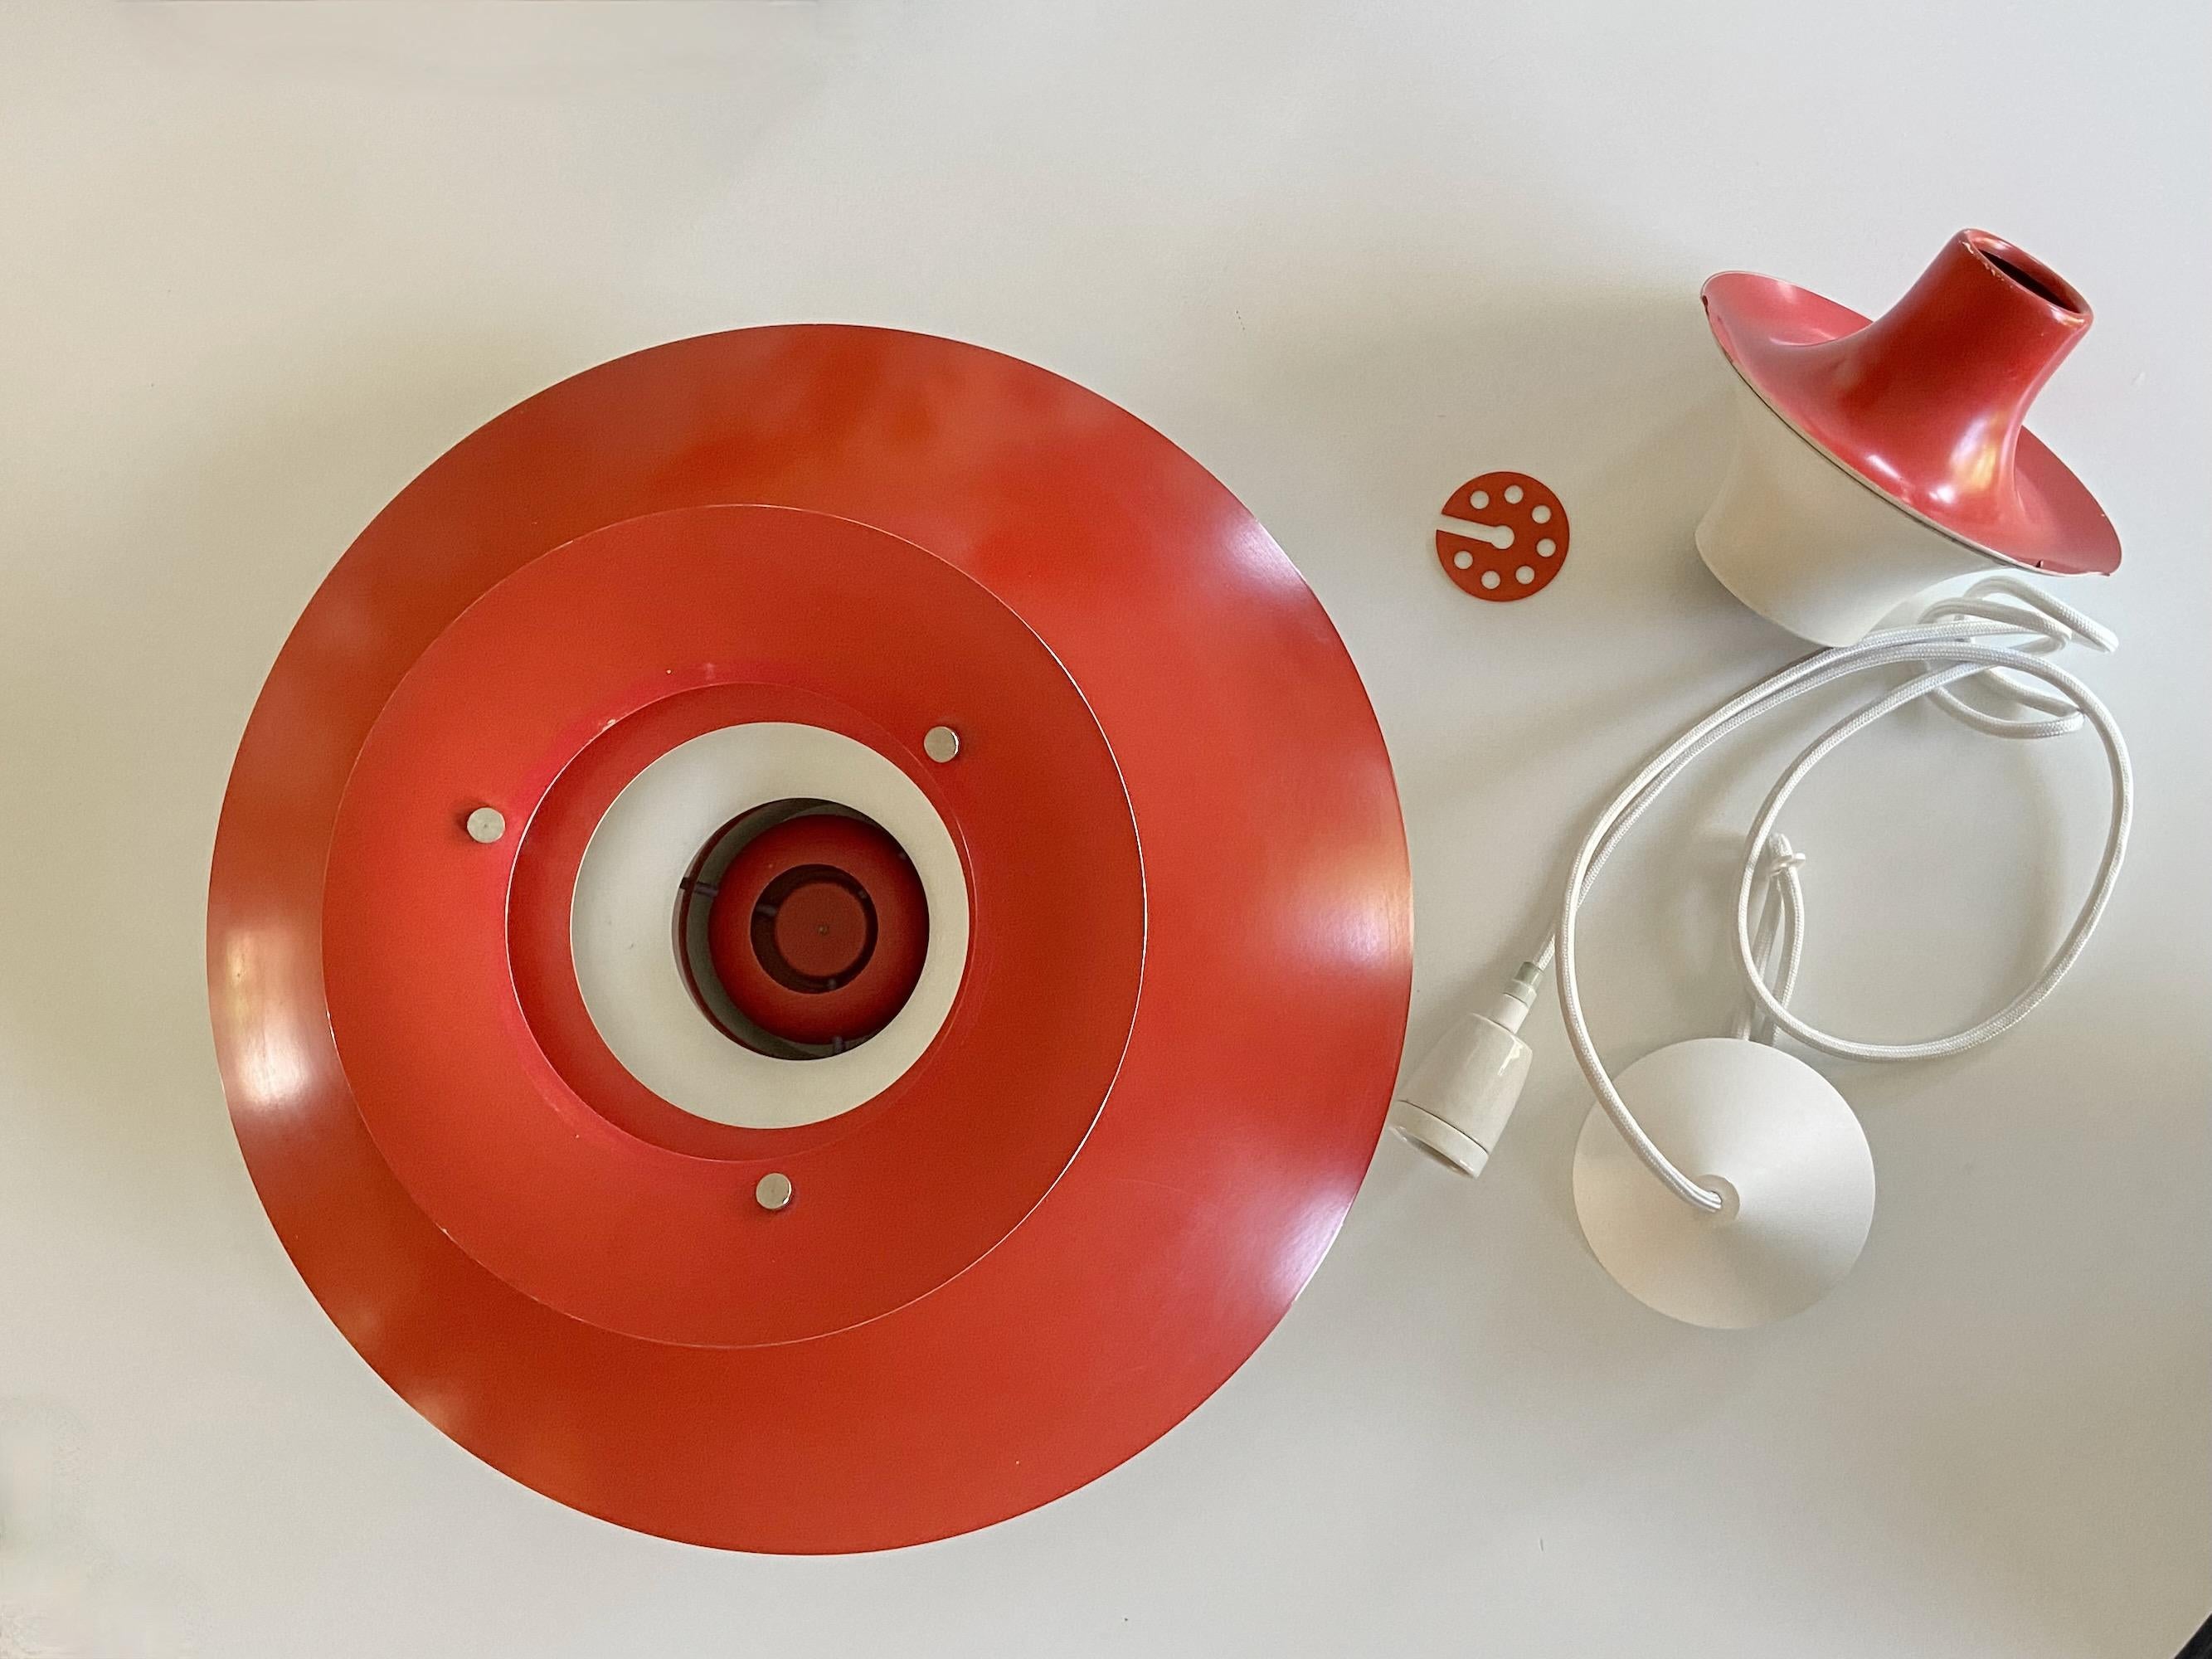 Nice red PH5 pendant lamp design by Poul Henningsen produced by Louis Poulsen, Made in Denmark. This is the nice old Version with the orange circle plate for the socket and long two-part funne . The lamp is in good condition. No parts missing, no